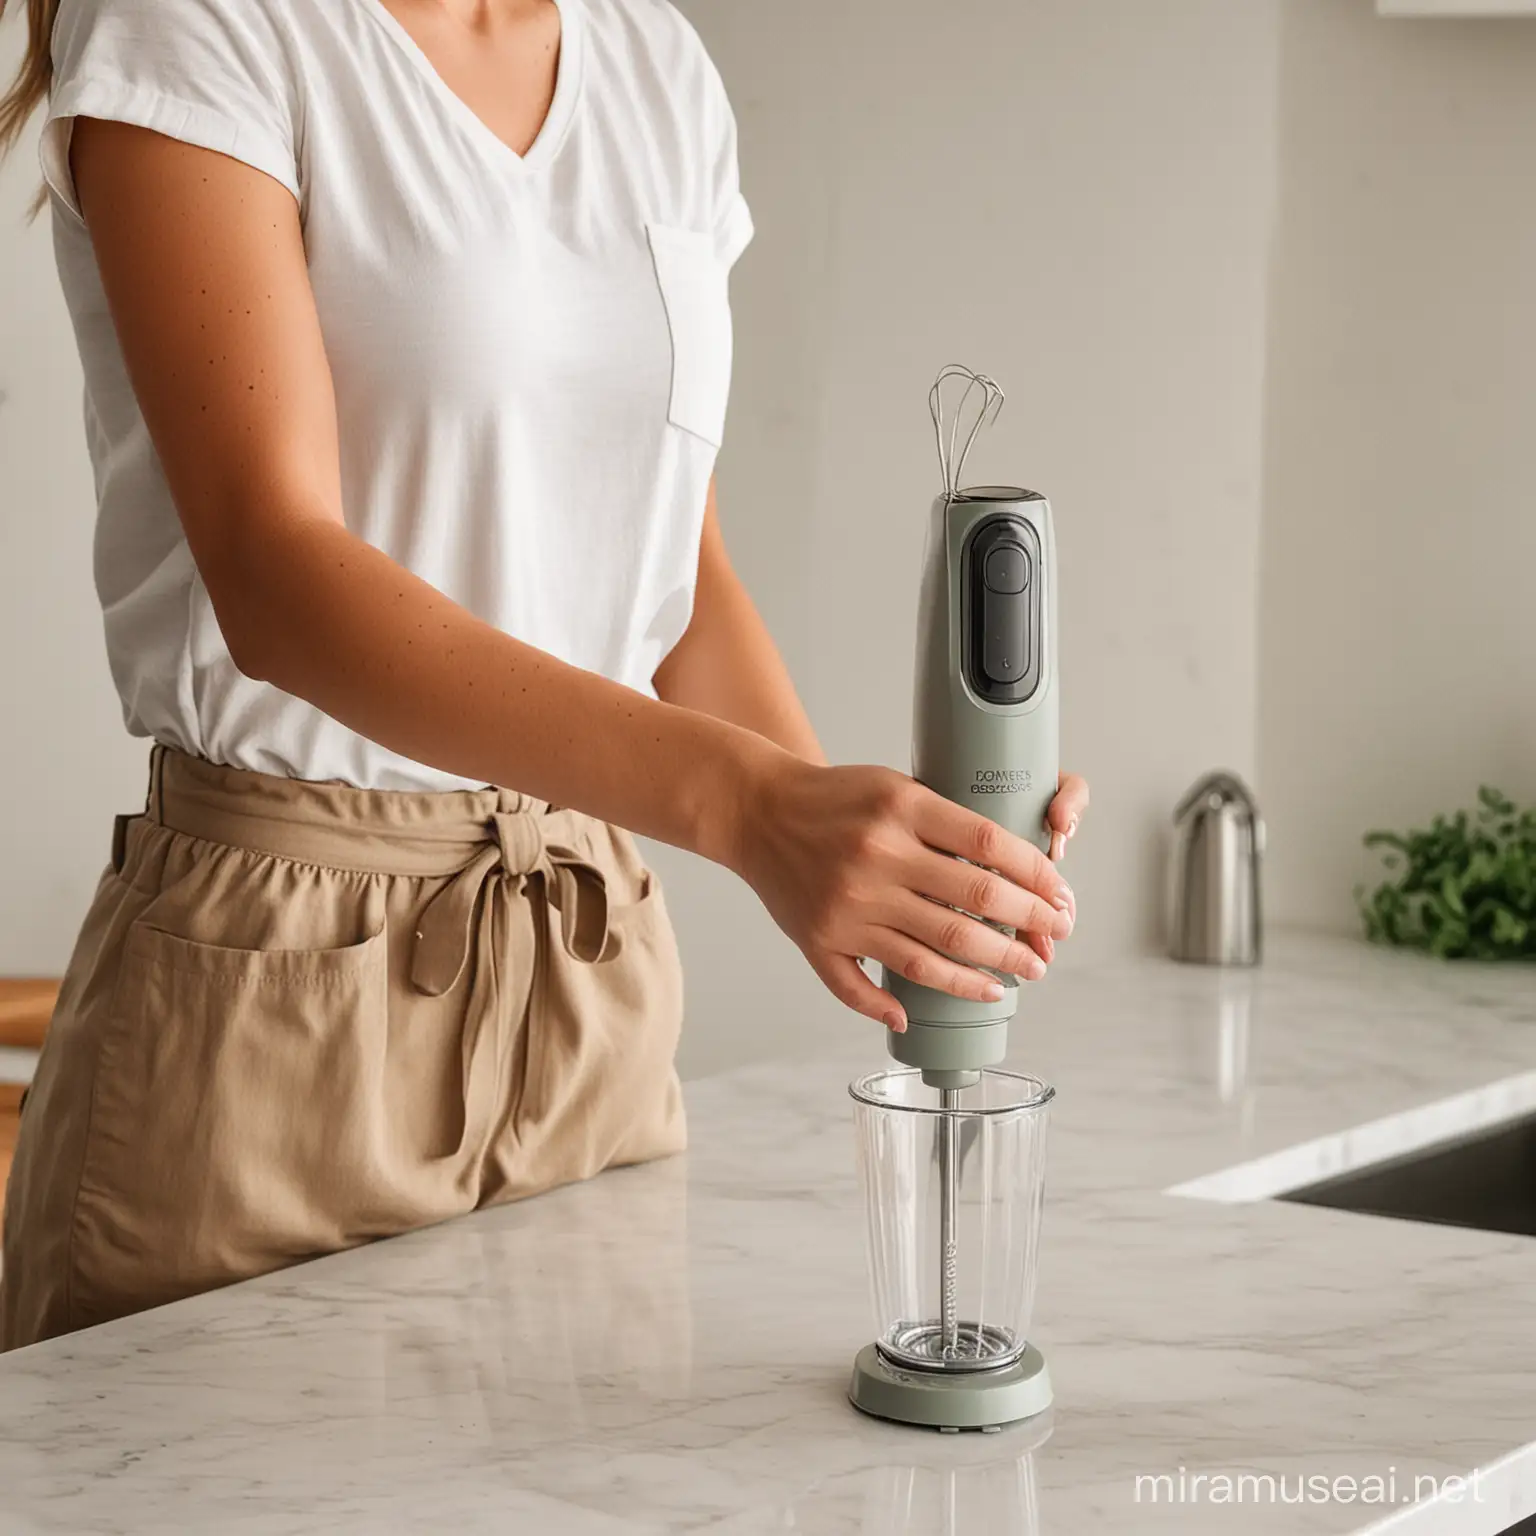 Woman Holding Stick Blender on Kitchen Counter